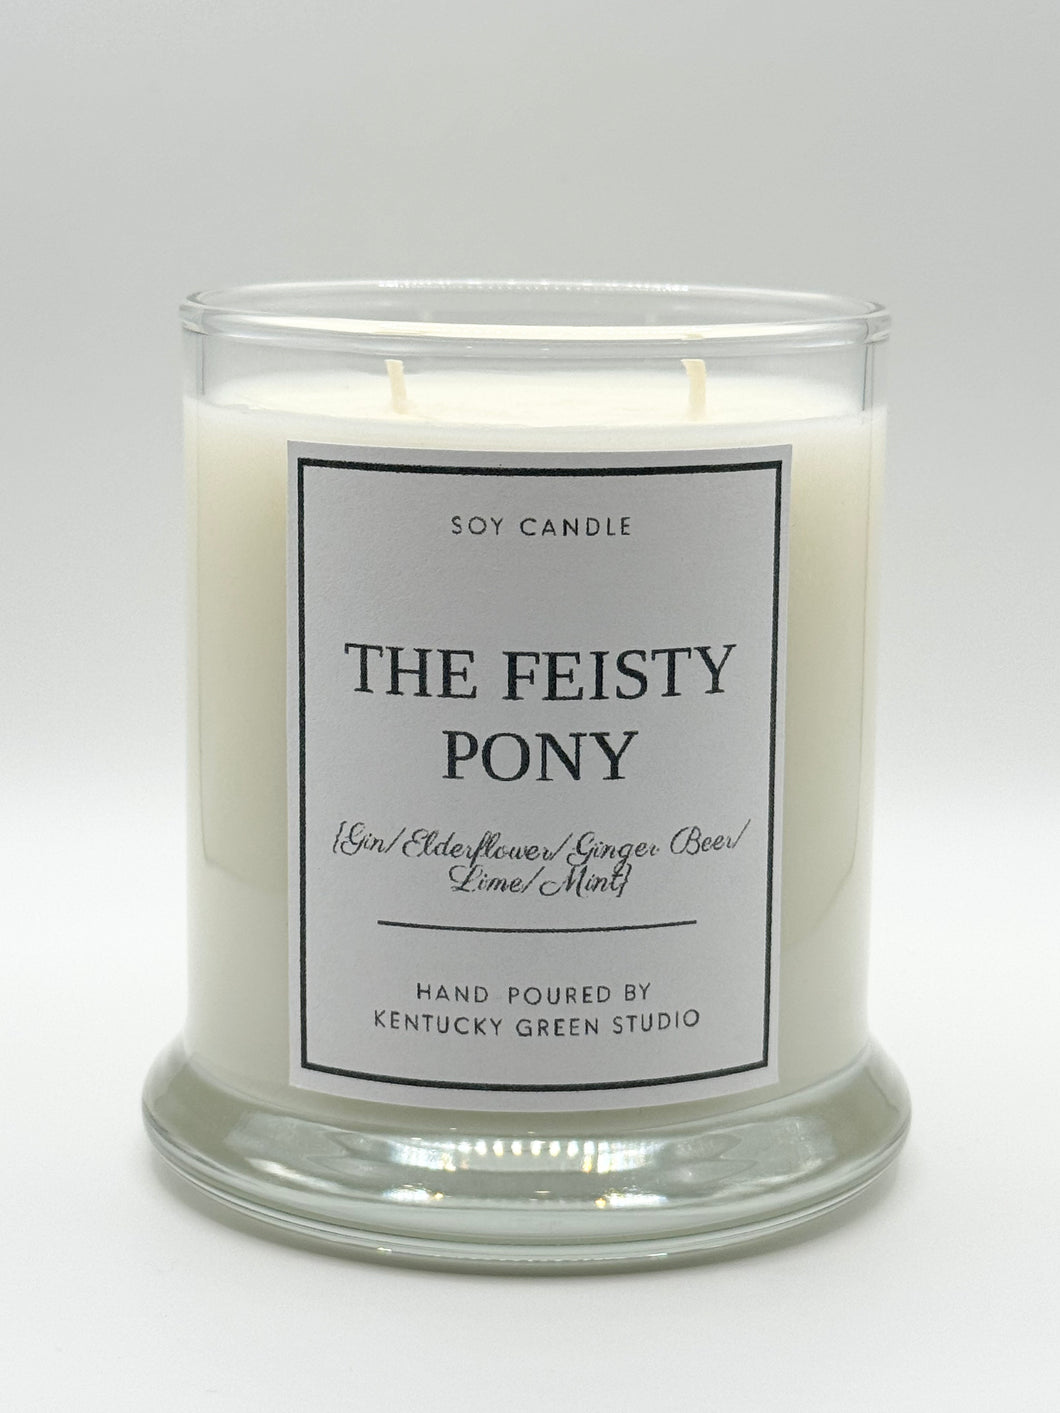 The Feisty Pony Soy Wax Candle